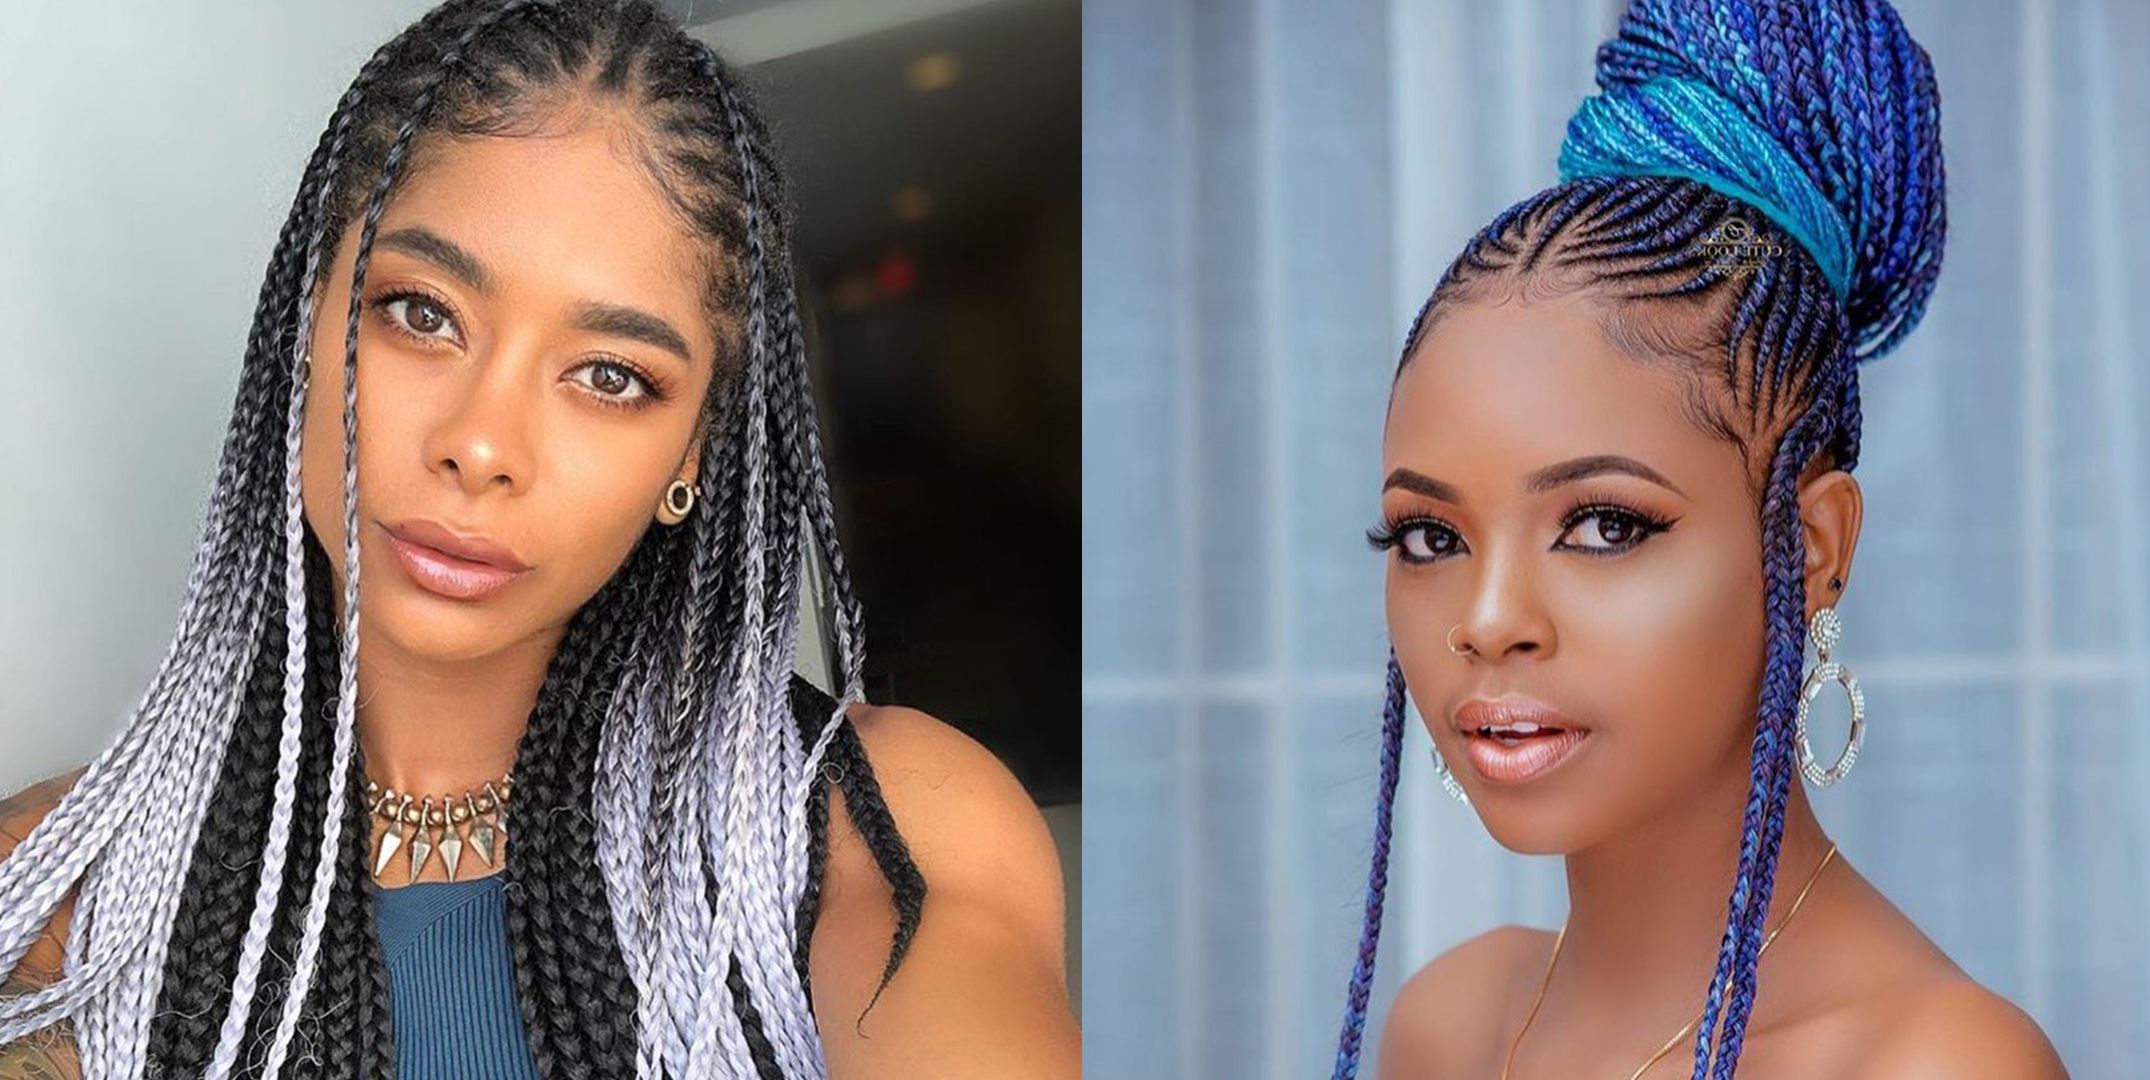 20 Best Fulani Braids Of 2020 – Easy Protective Hairstyles Inside Famous Beaded Plaits Braids Hairstyles (View 8 of 20)